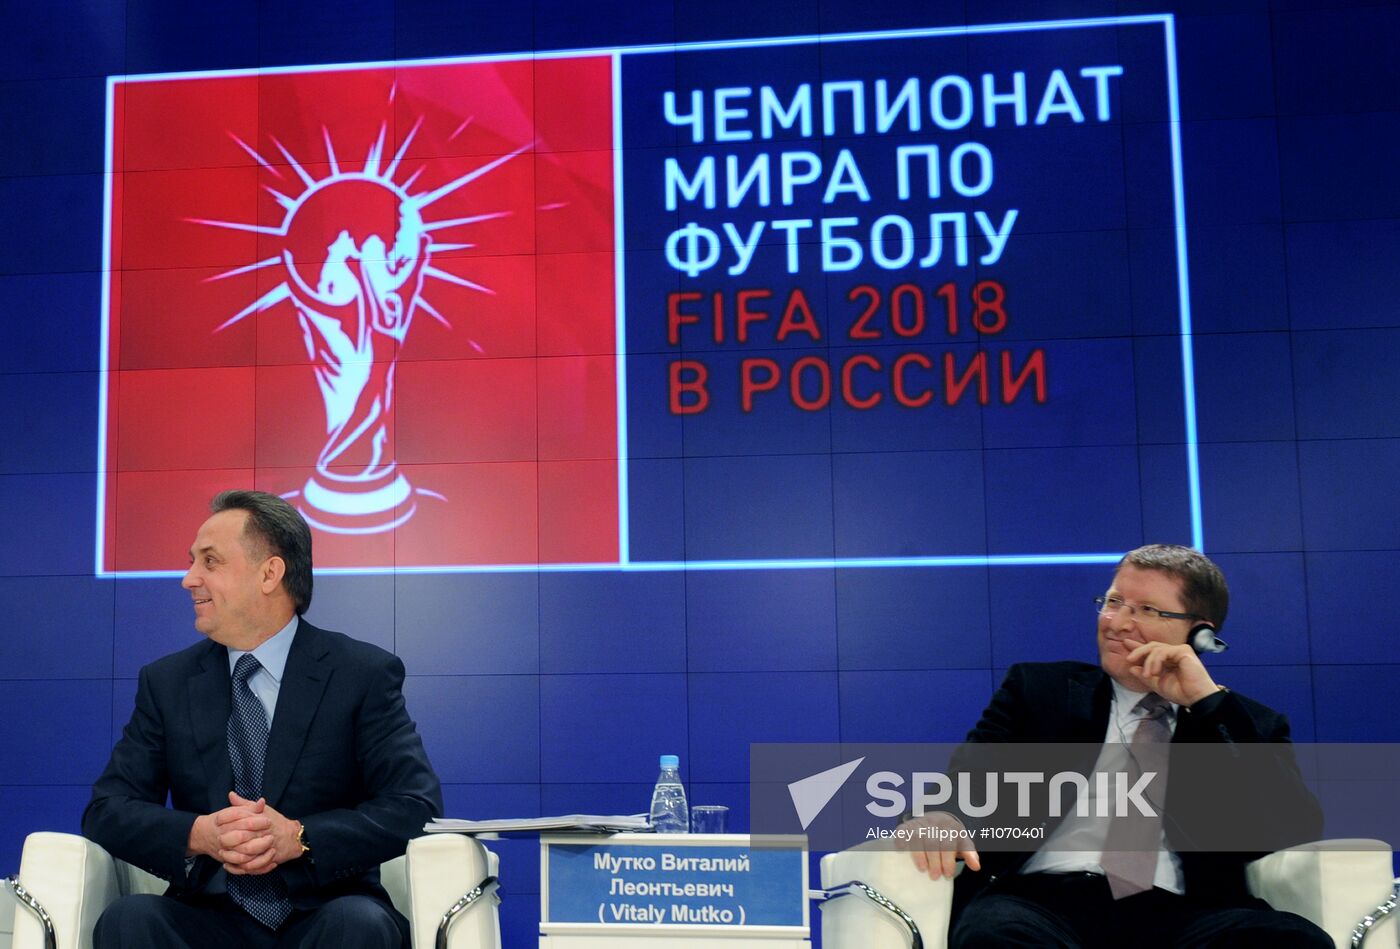 Press conference by 2018 World Football Championship committee